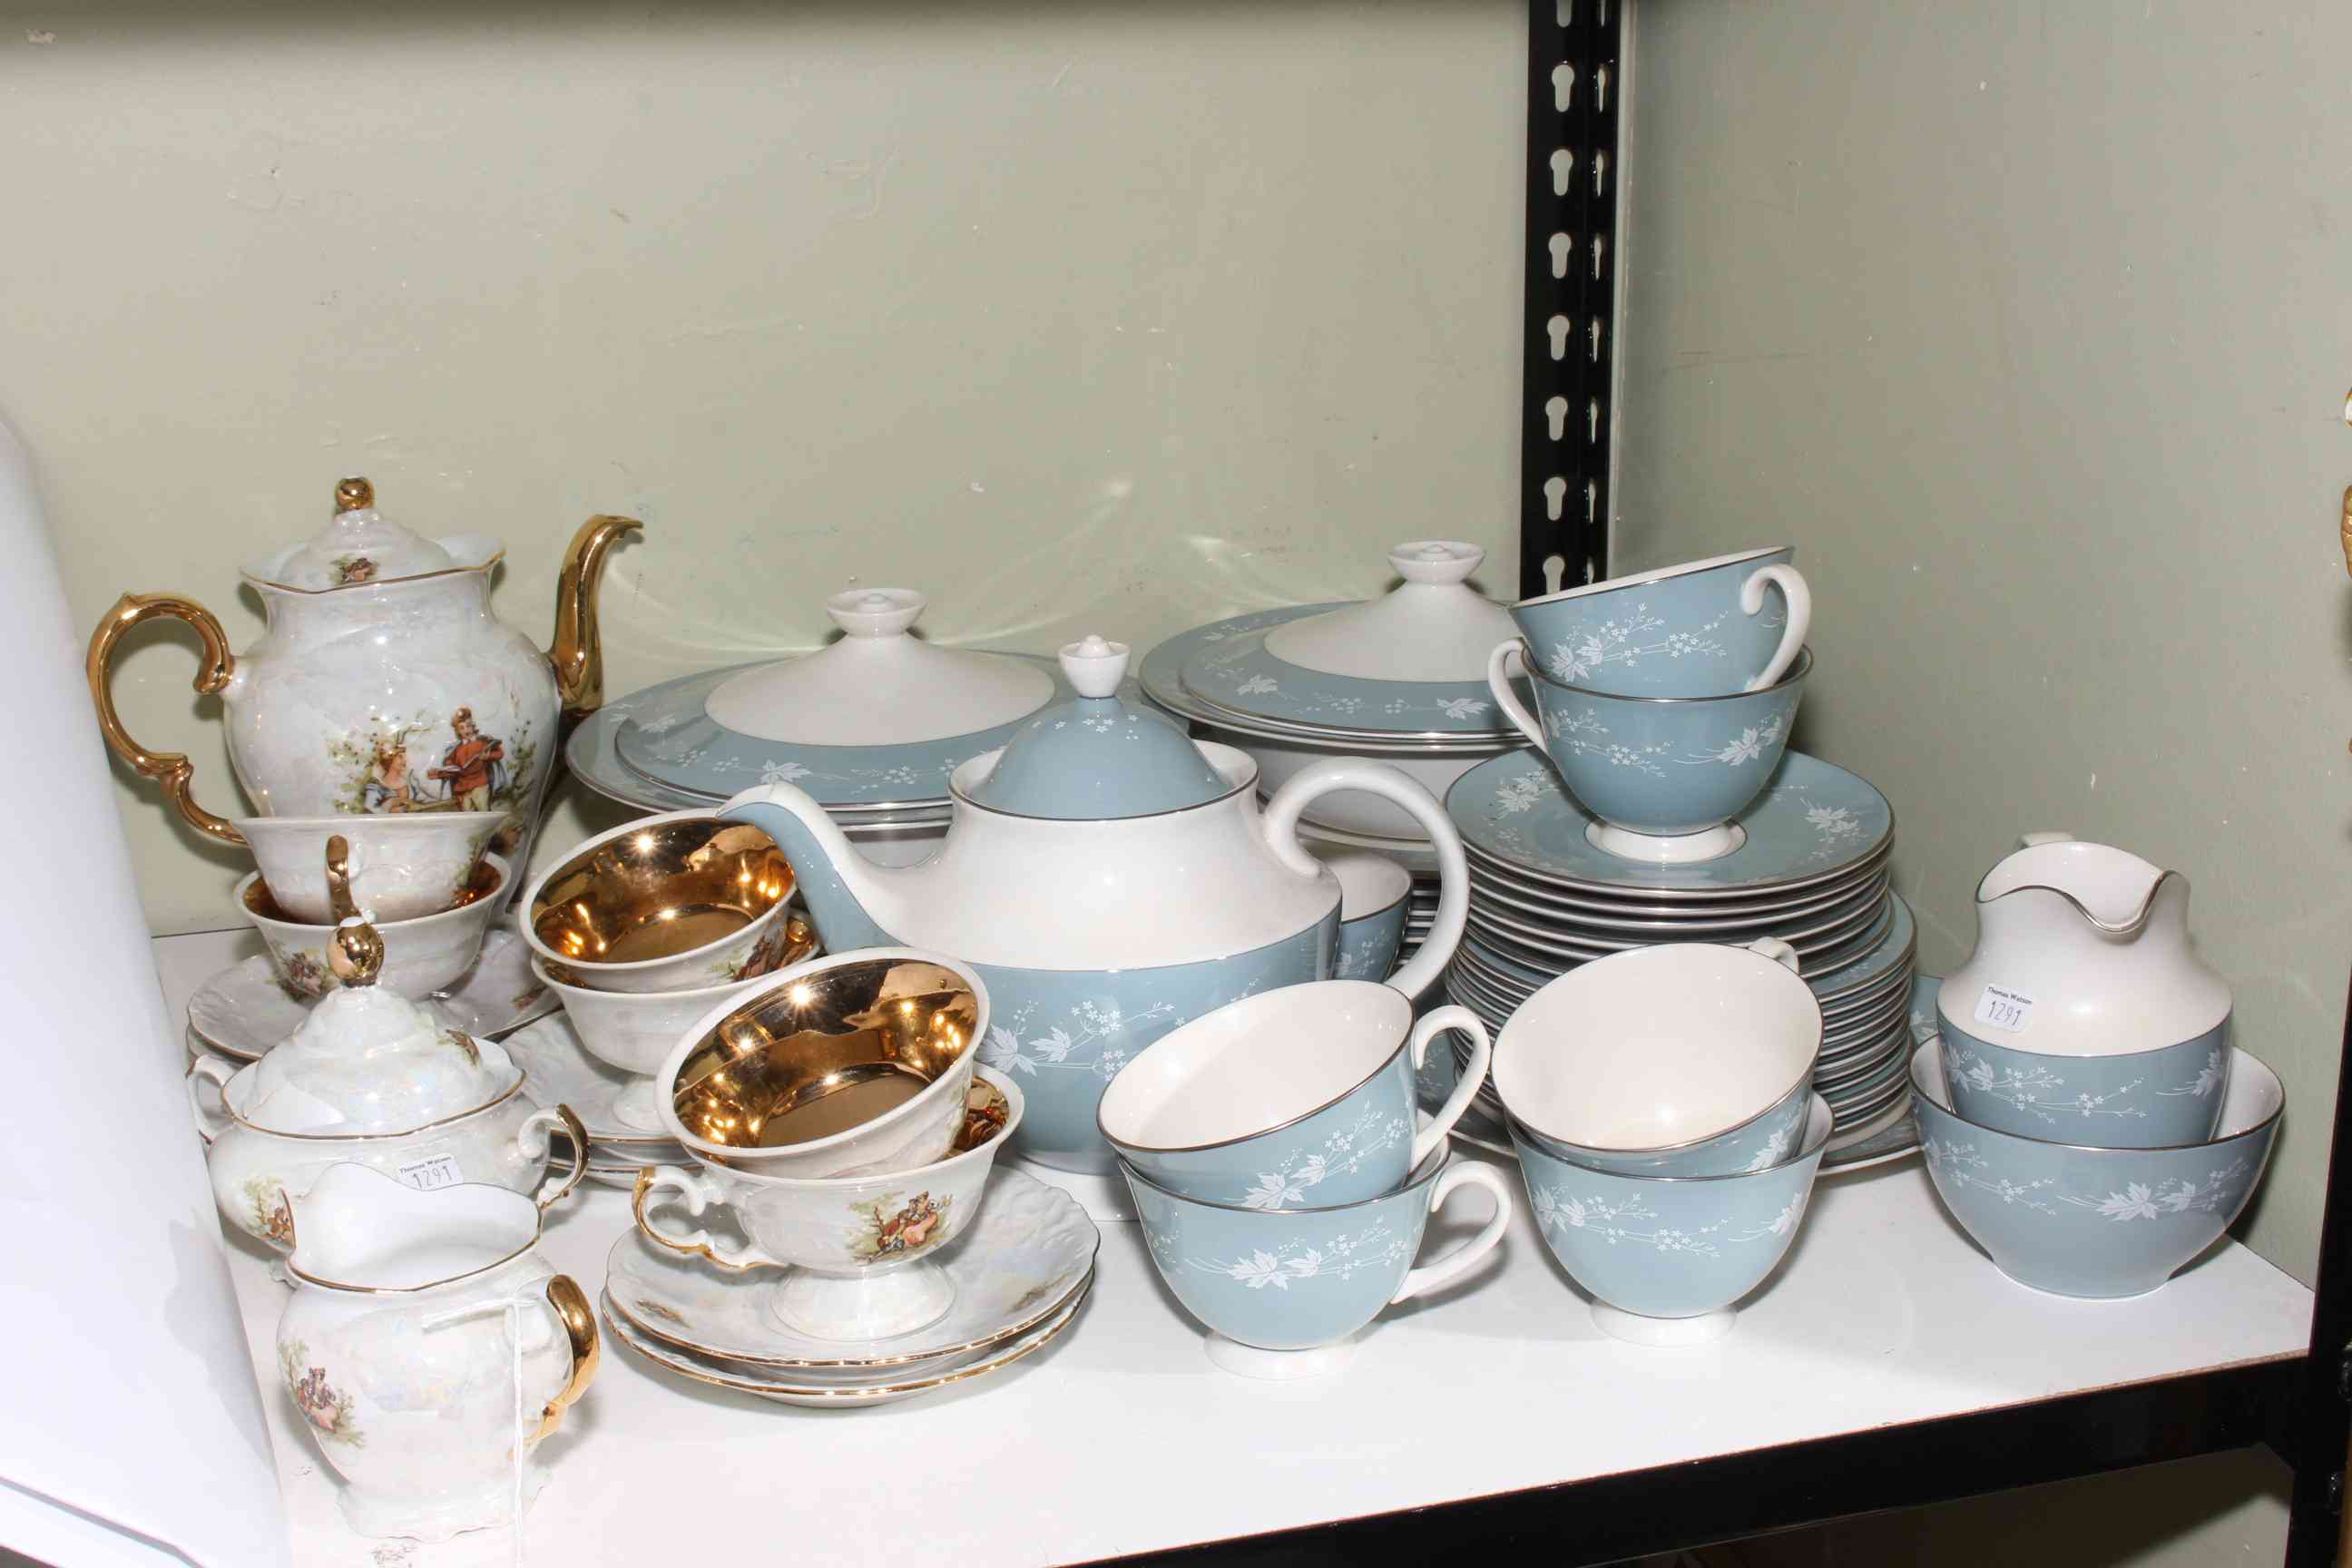 Royal Doulton Reflections dinner and teaware,